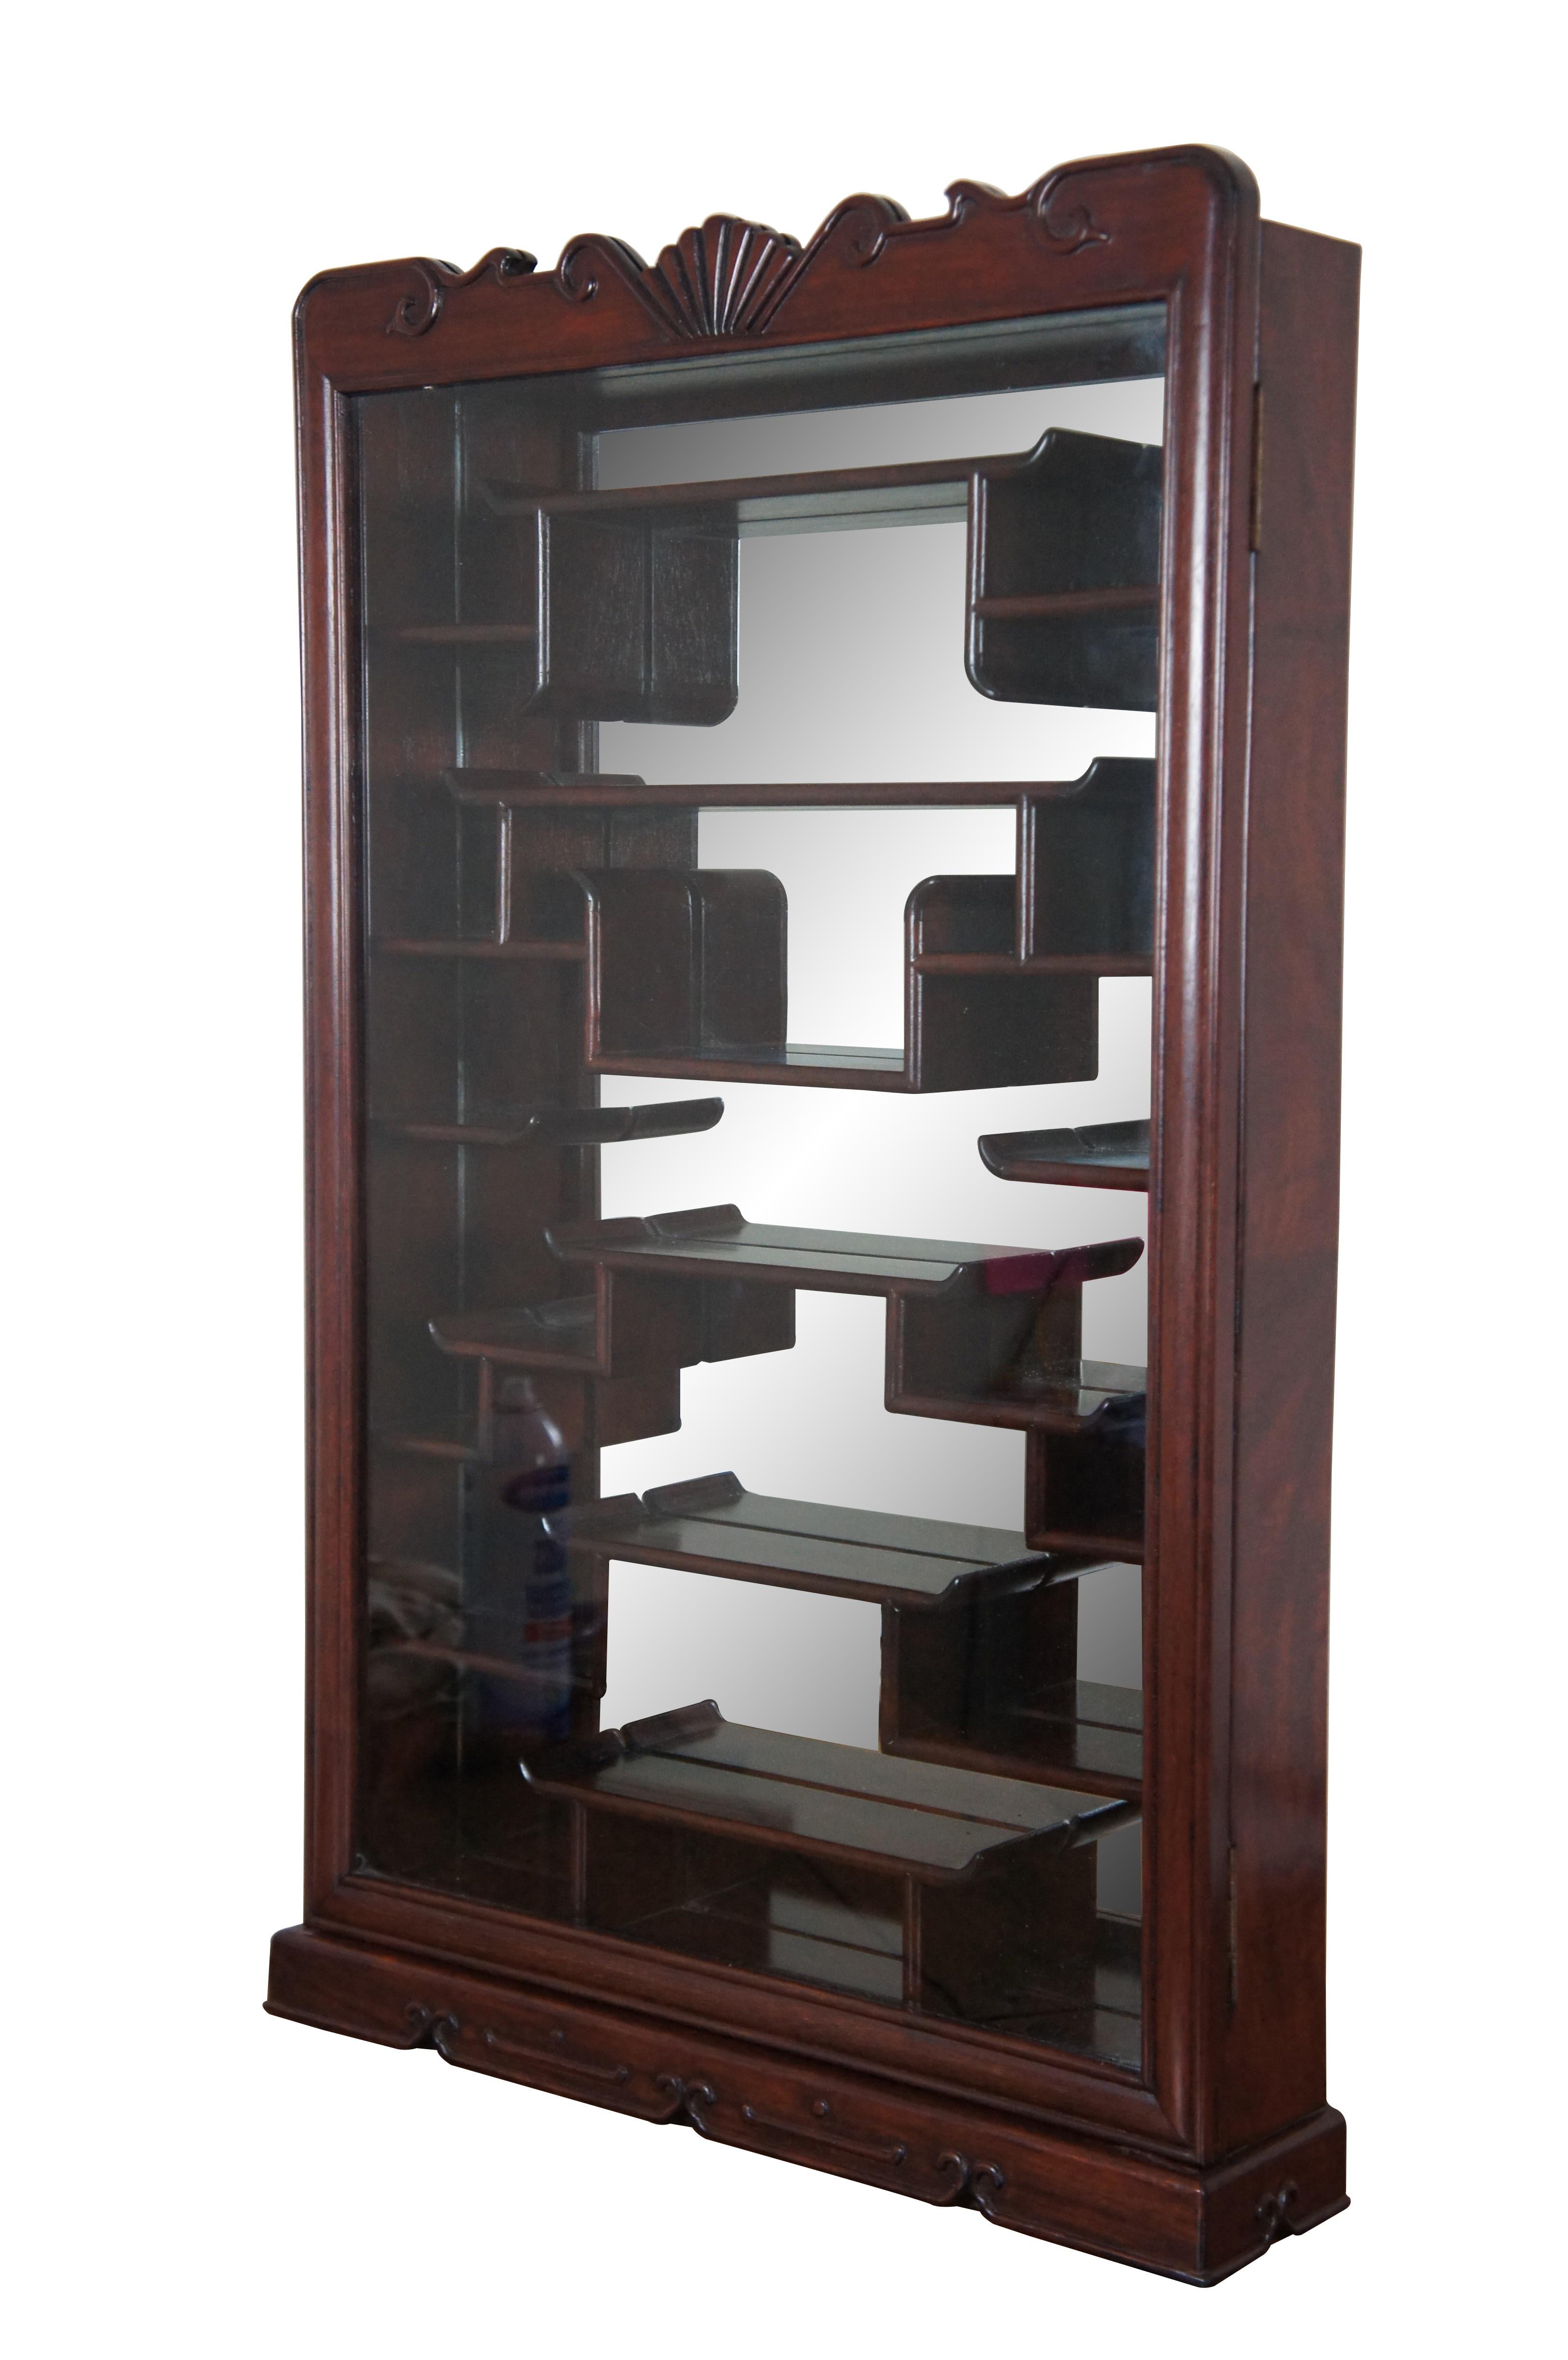 Vintage Chinese etagere wall shelf curio cabinet featuring Chippendale styling with mirrored back, carved shell top glass door and multiple display shelves for Netsuke / trinkets / snuff bottles etc.

Dimensions:
20” x 4” x 32.75” (Width x Depth x